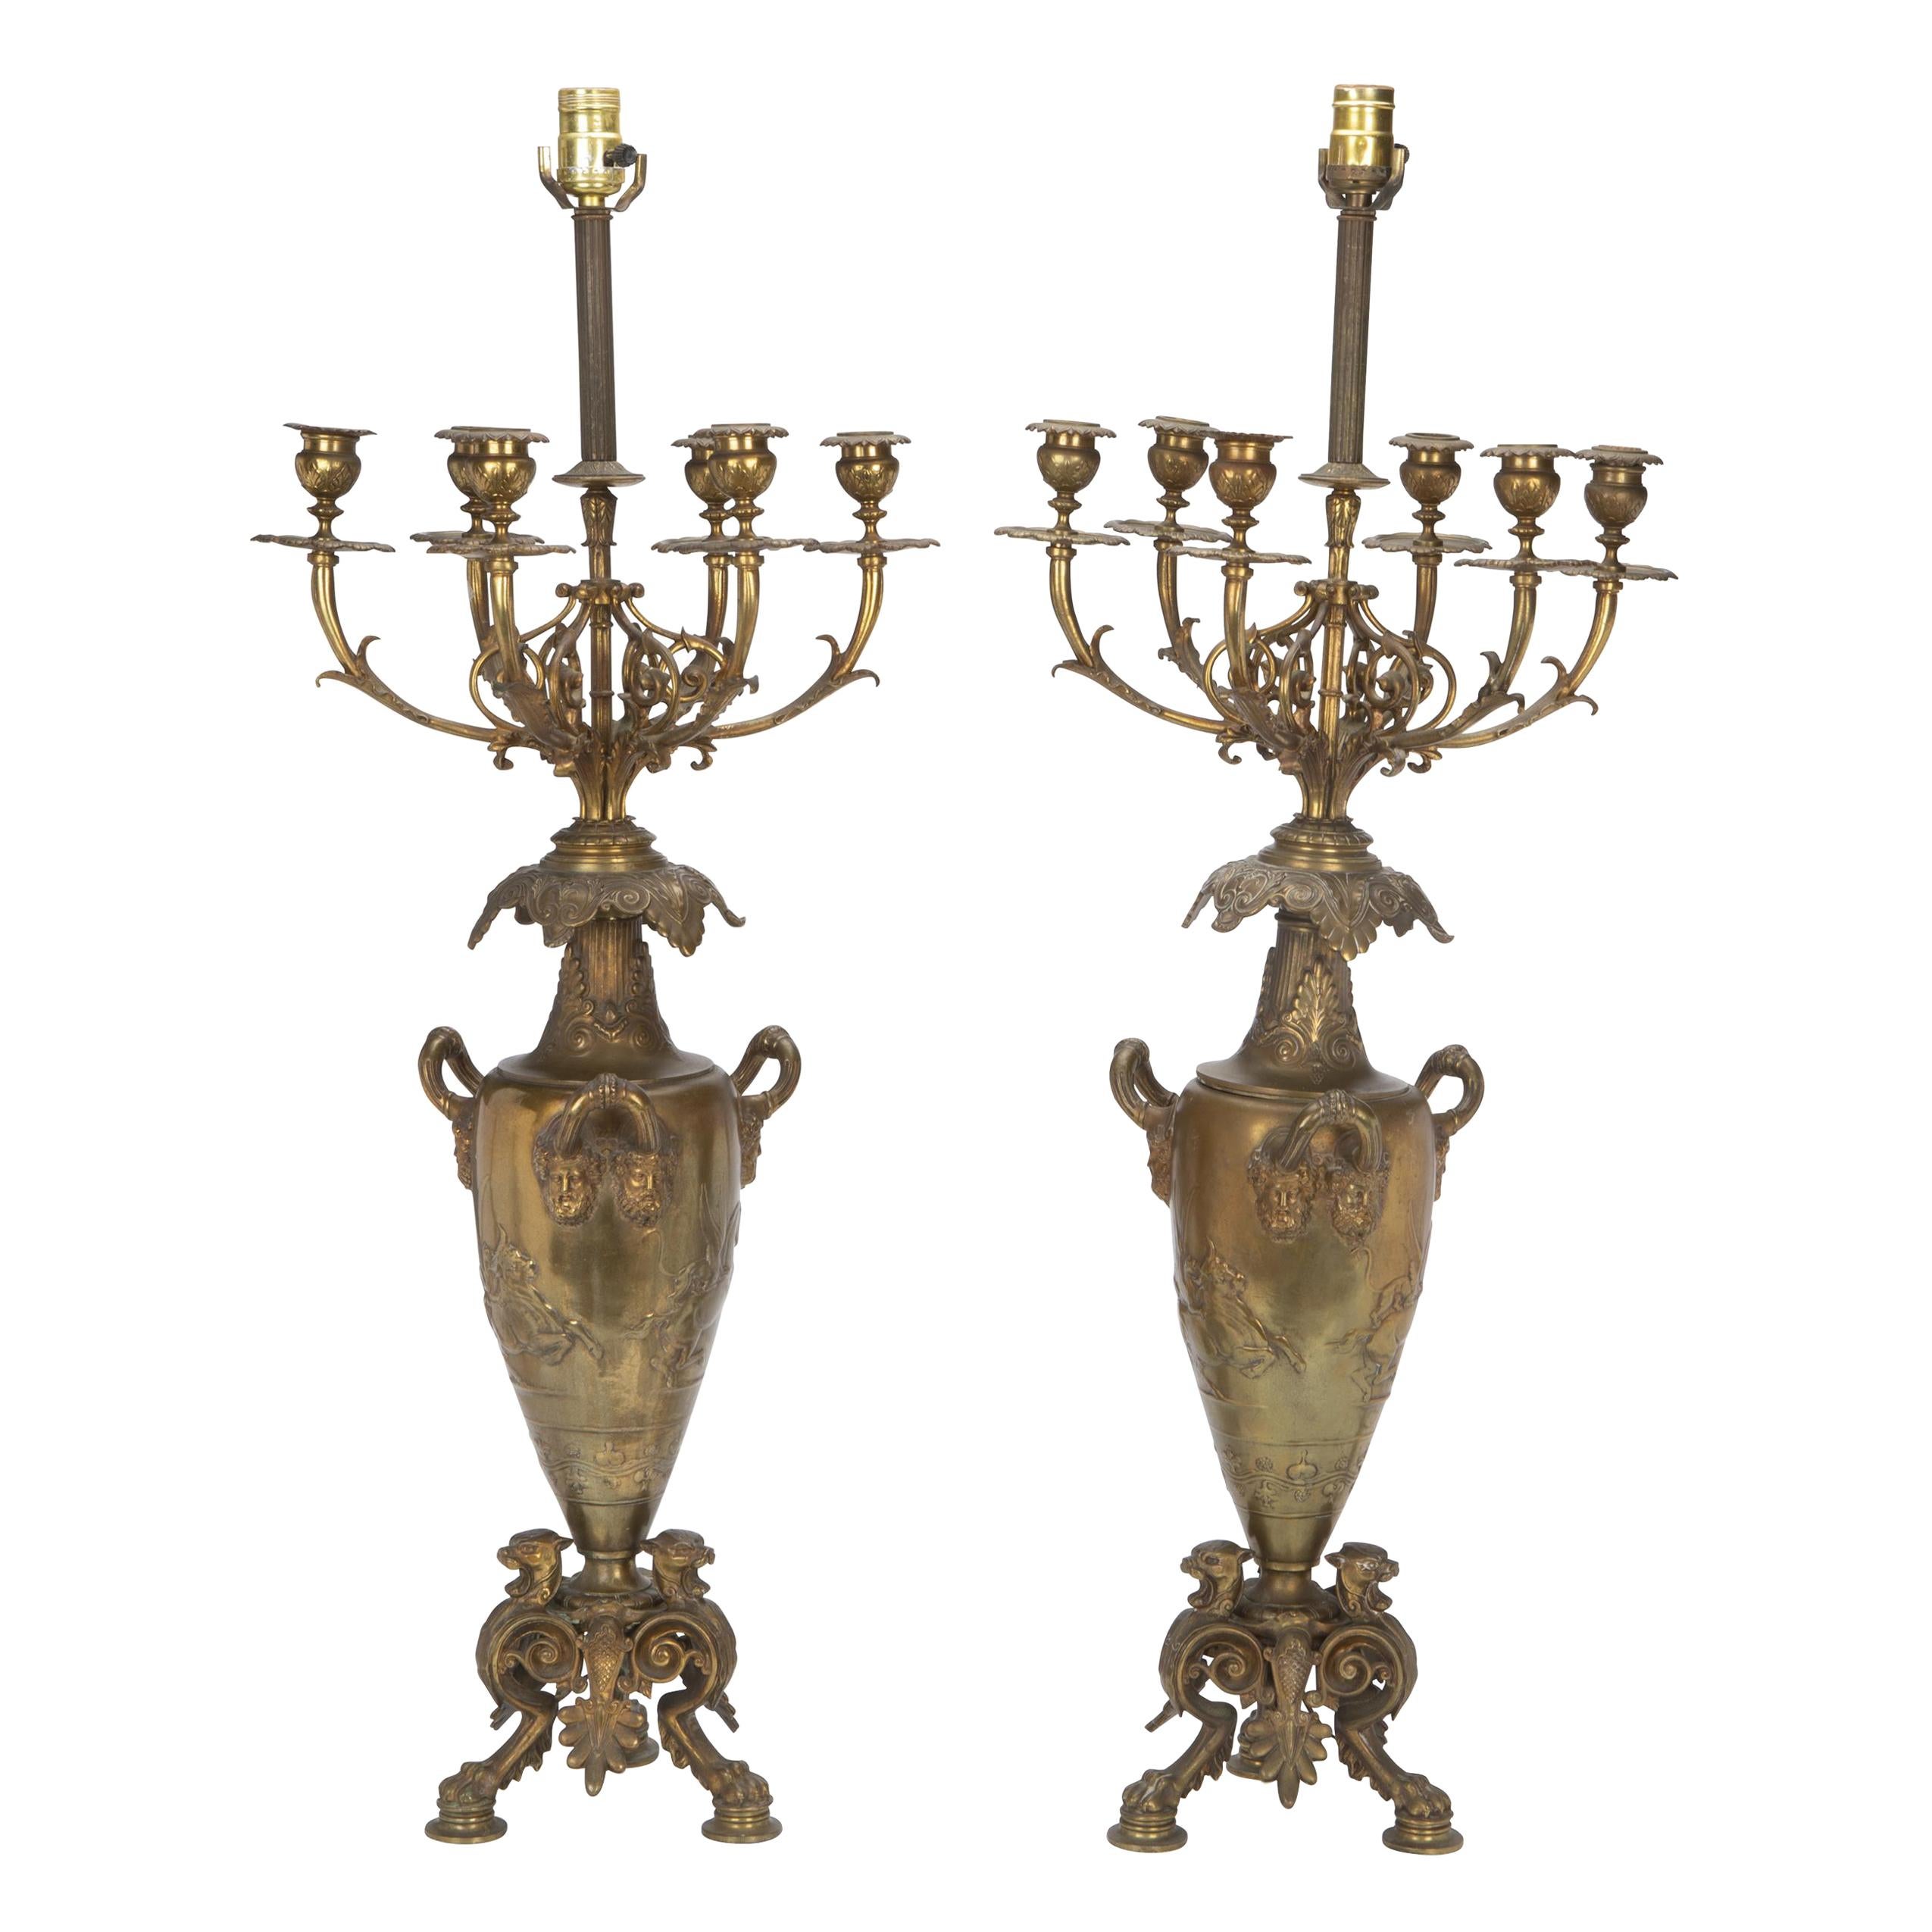 Pair of French Bronze Candelabra Lamps, Early 20th Century